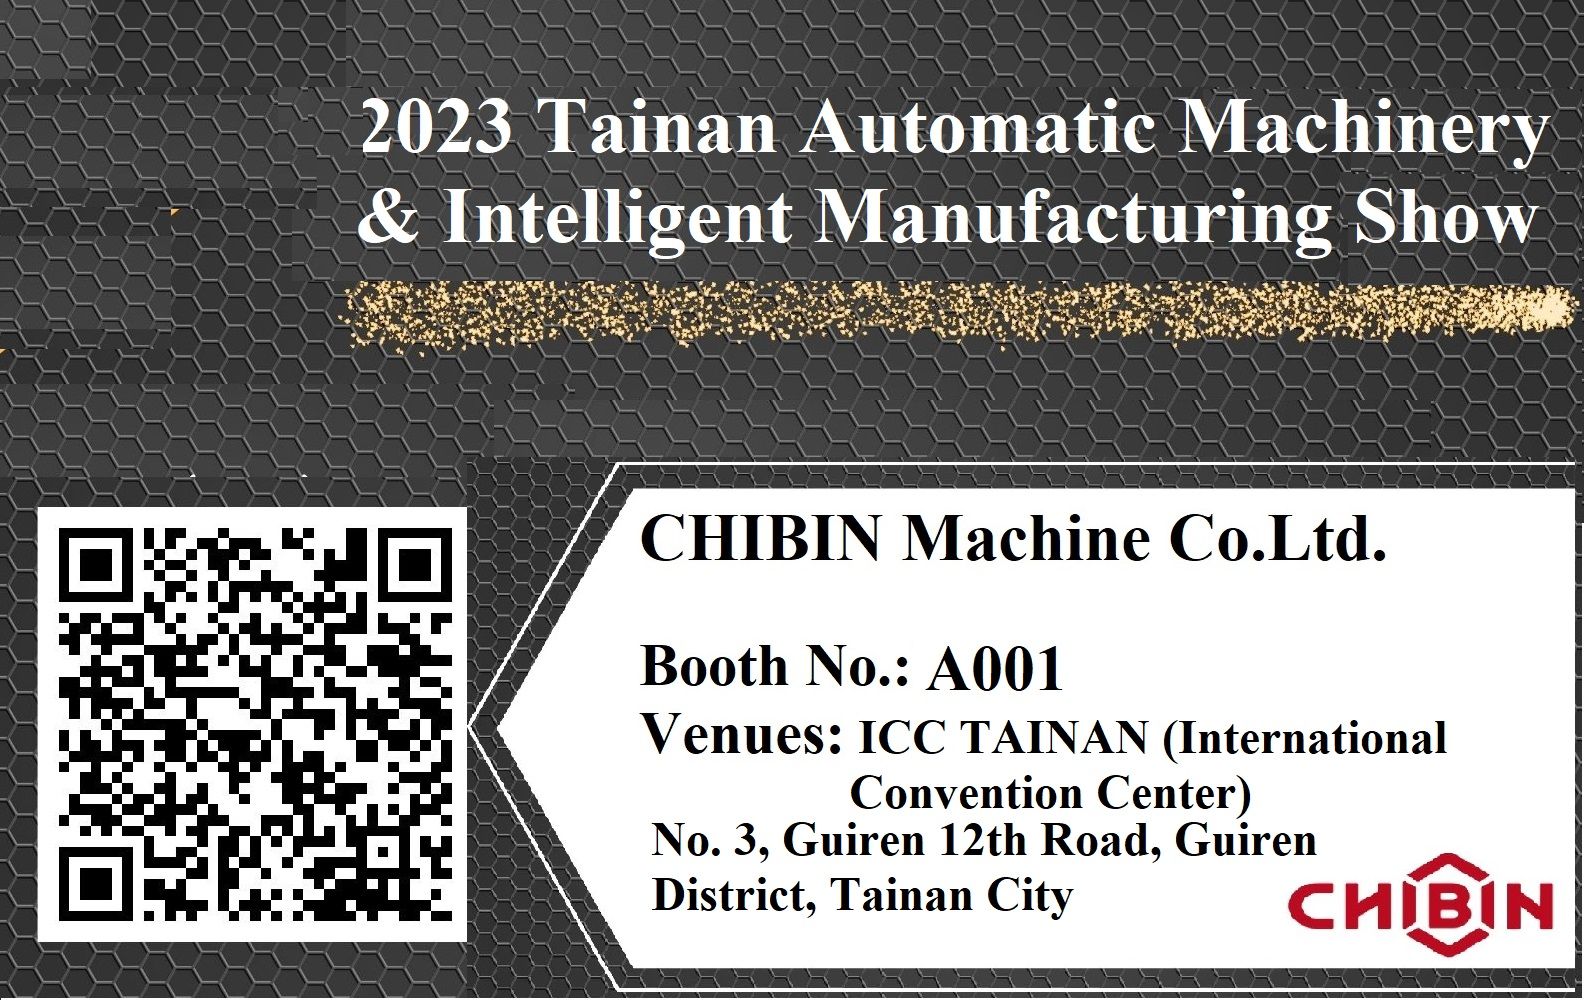 2023 Tainan Automatic Machinery & Intelligent Manufacturing Show (2023 CTMS Tainan)